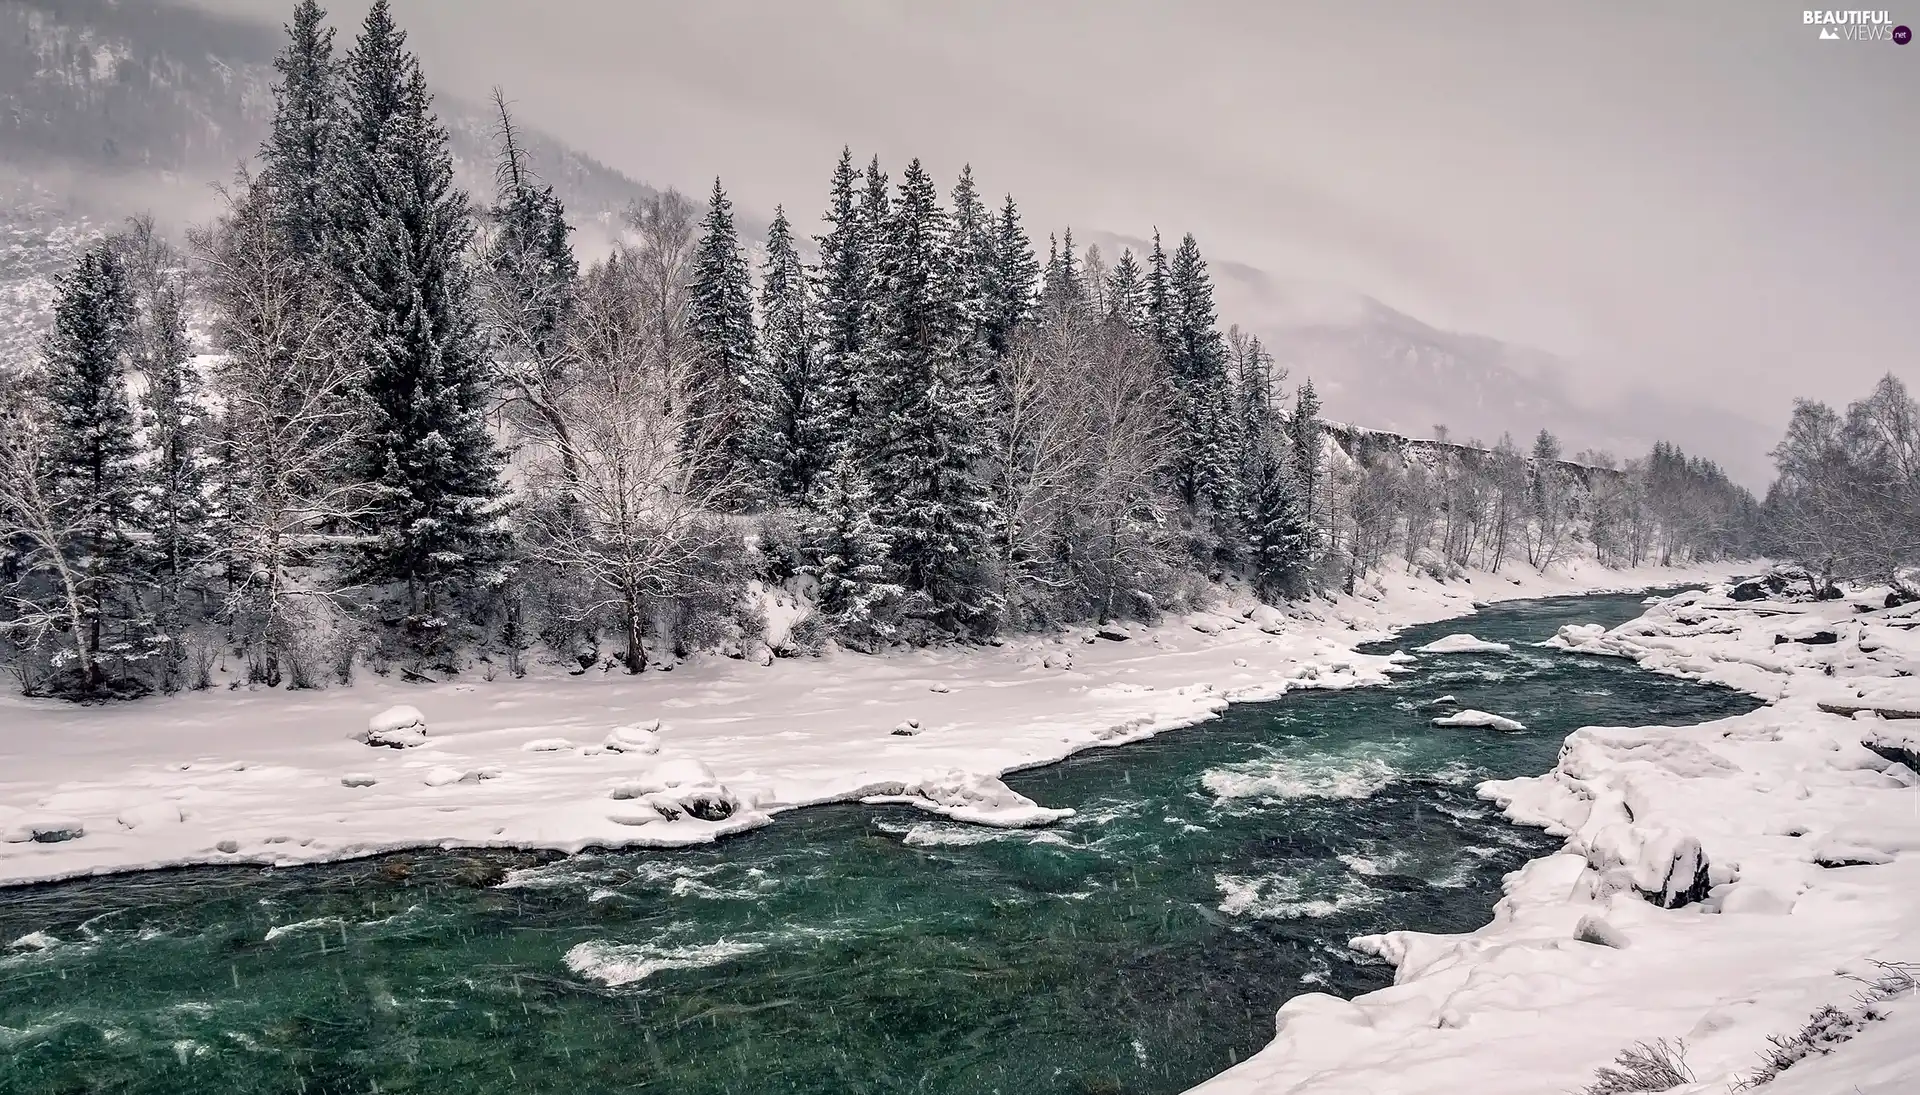 River, winter, trees, viewes, Snowy, Fog